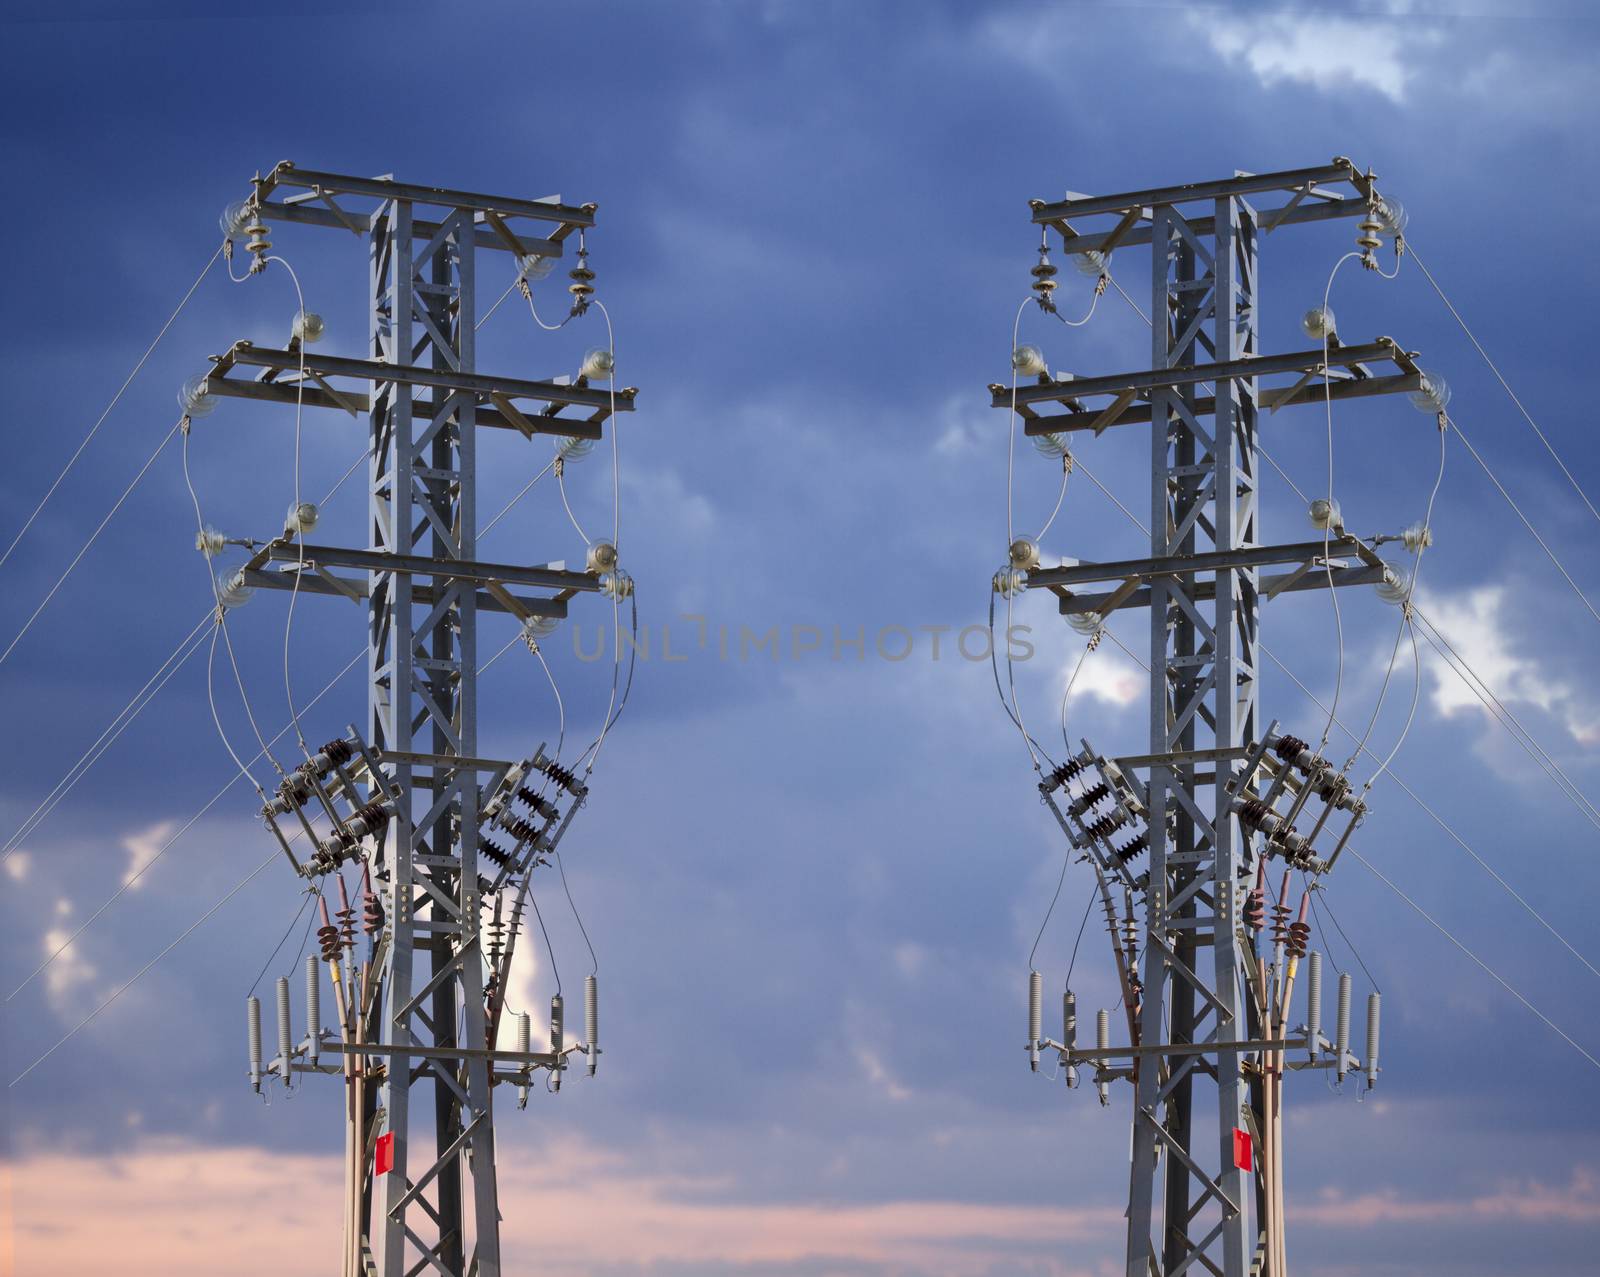 Electricity pylons with high-voltage wires by FernandoCortes